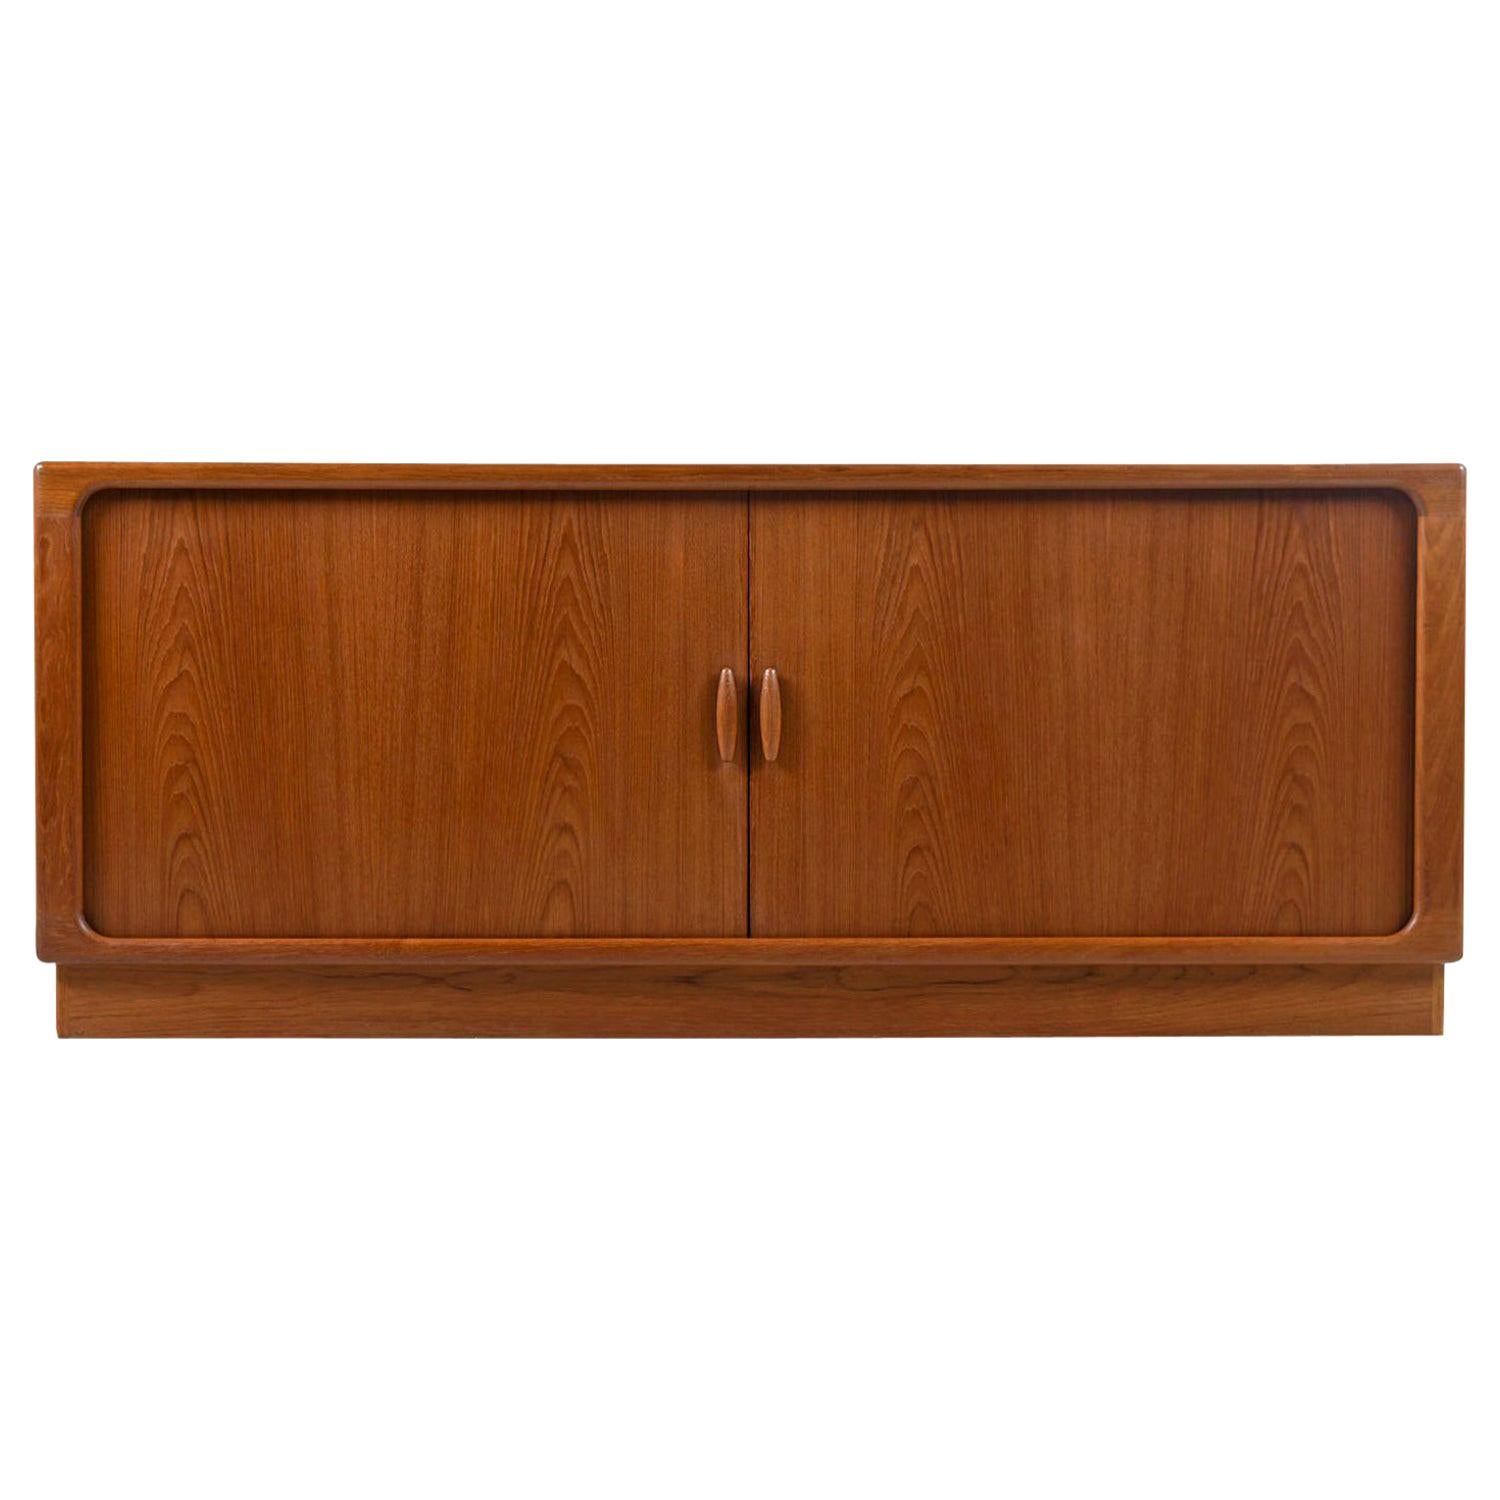 Exquisitely crafted vintage 1970s Danish teak credenza by Dyrlund. This is the perfect media center. The large cabinet spaces provide amble room for 12 inch LP records and components. Mount your flat screen above or place on the top with a stand.